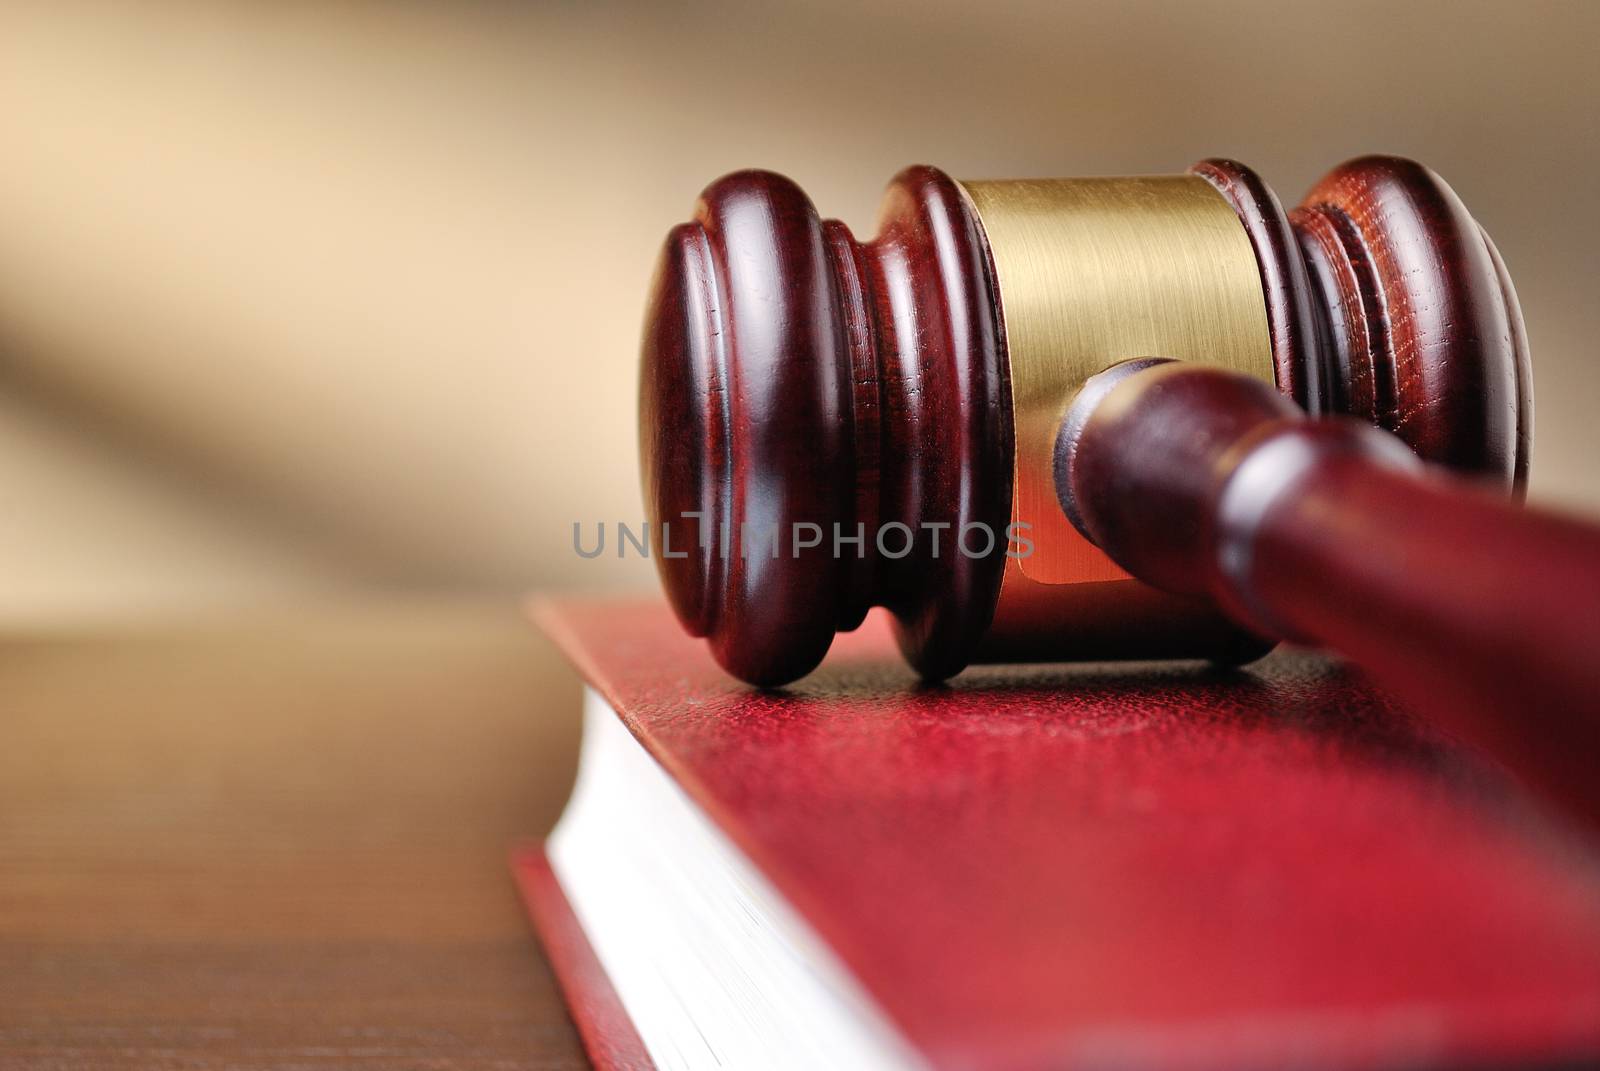 Wooden judges gavel with a brass band around the head resting on top of a closed red law book with shallow dof and copyspace